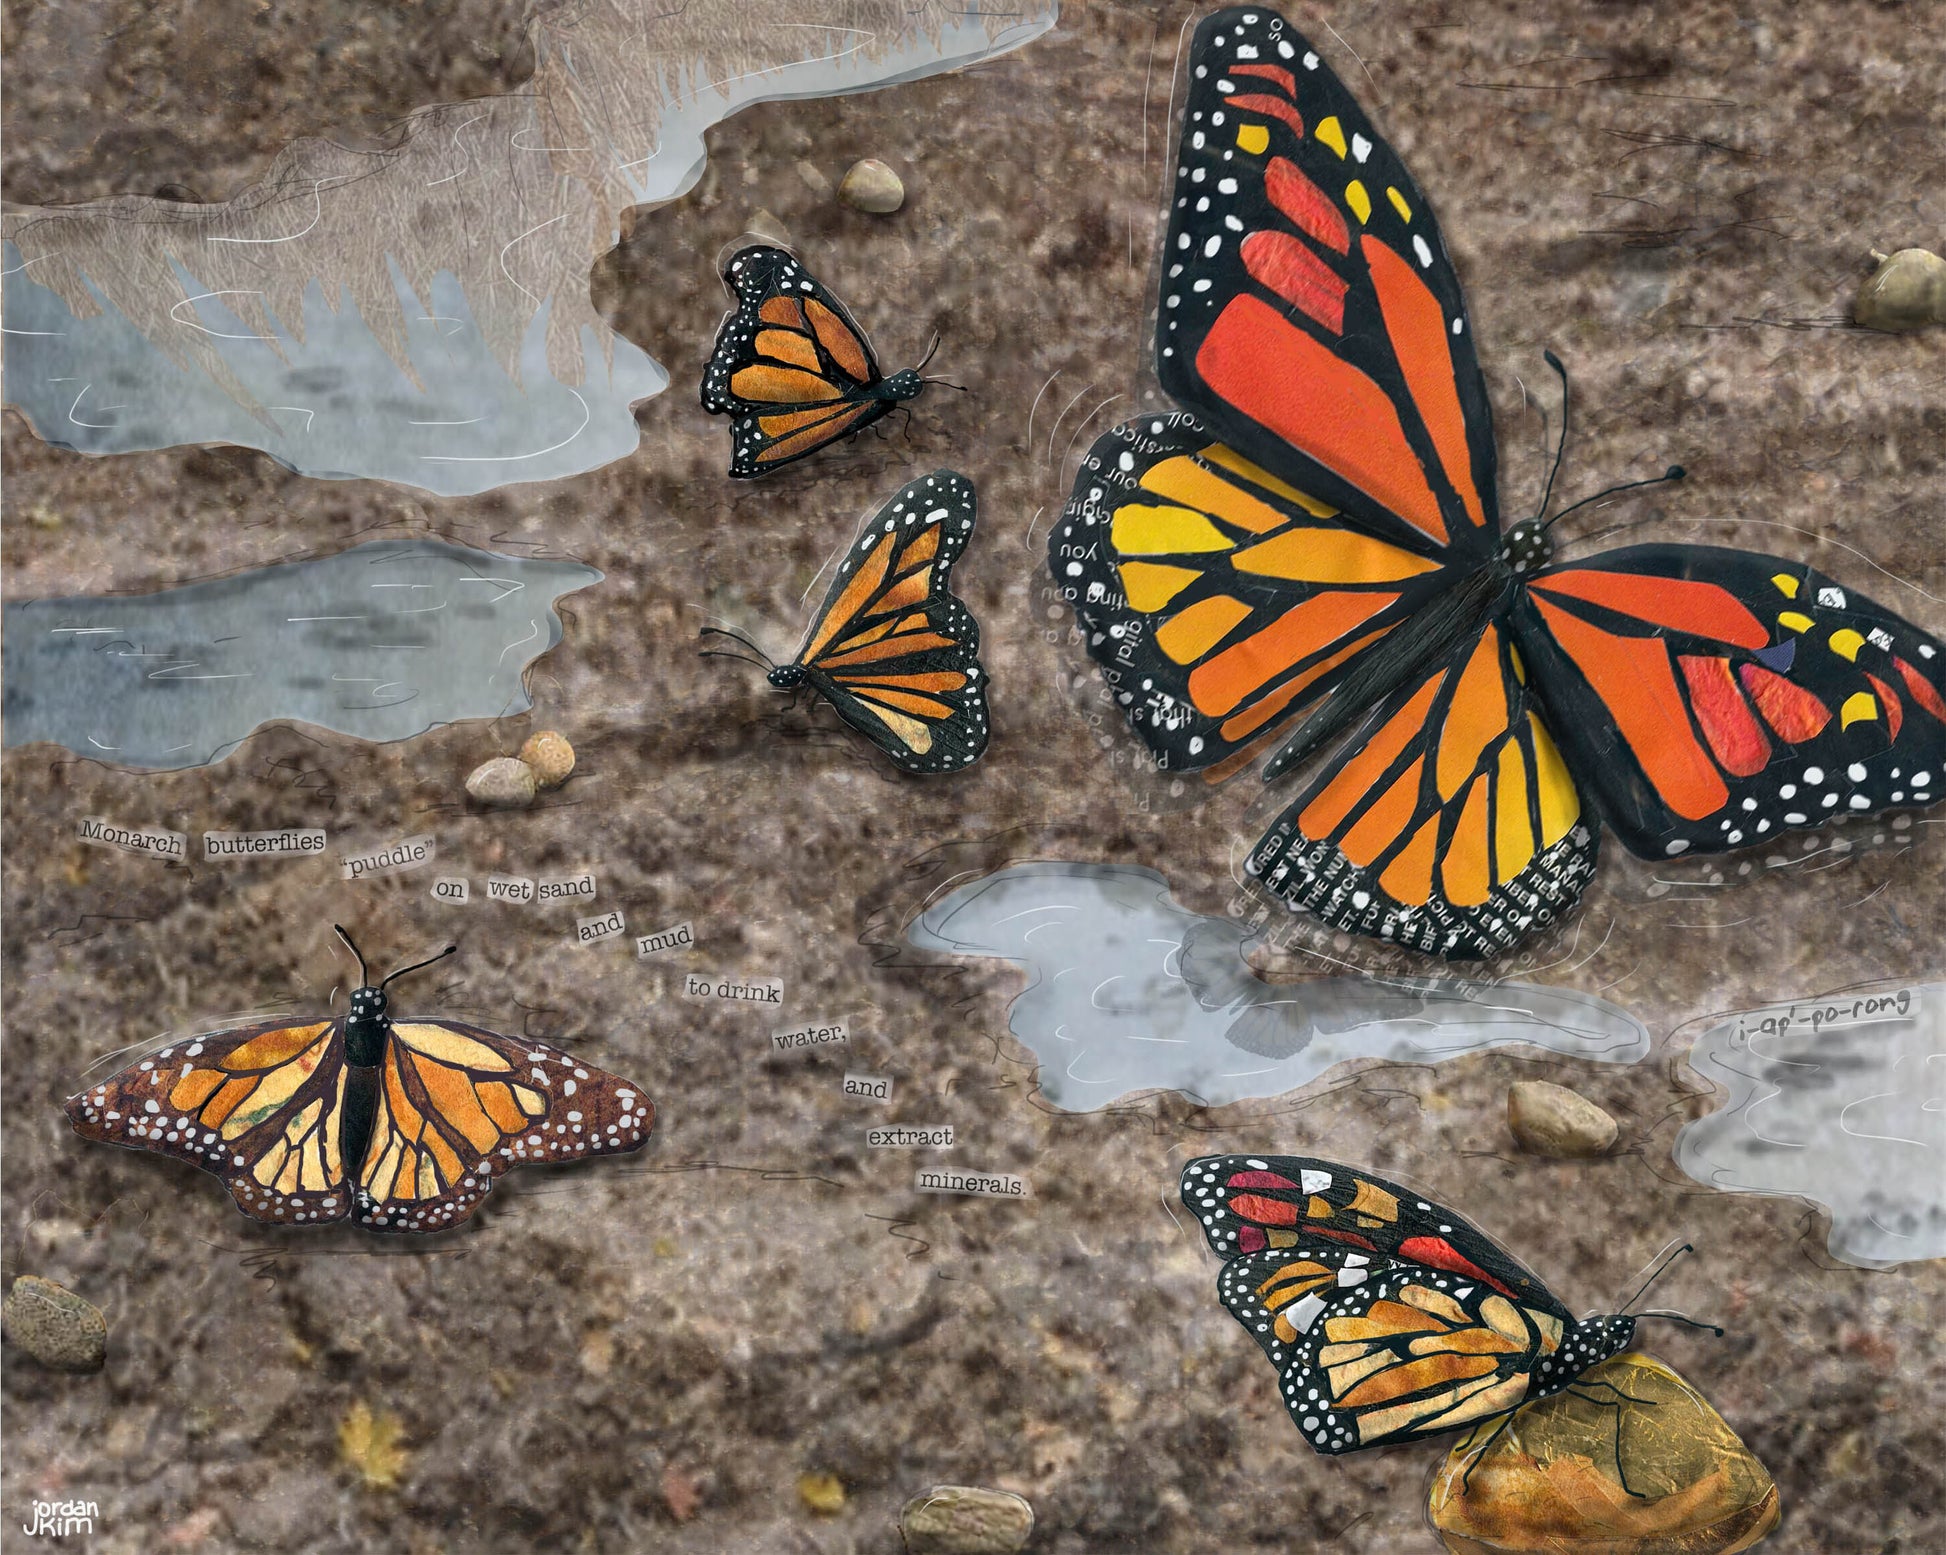 Greeting Card of mixed media collage of monarch butterflies puddling, Yellowstone - Blank Inside